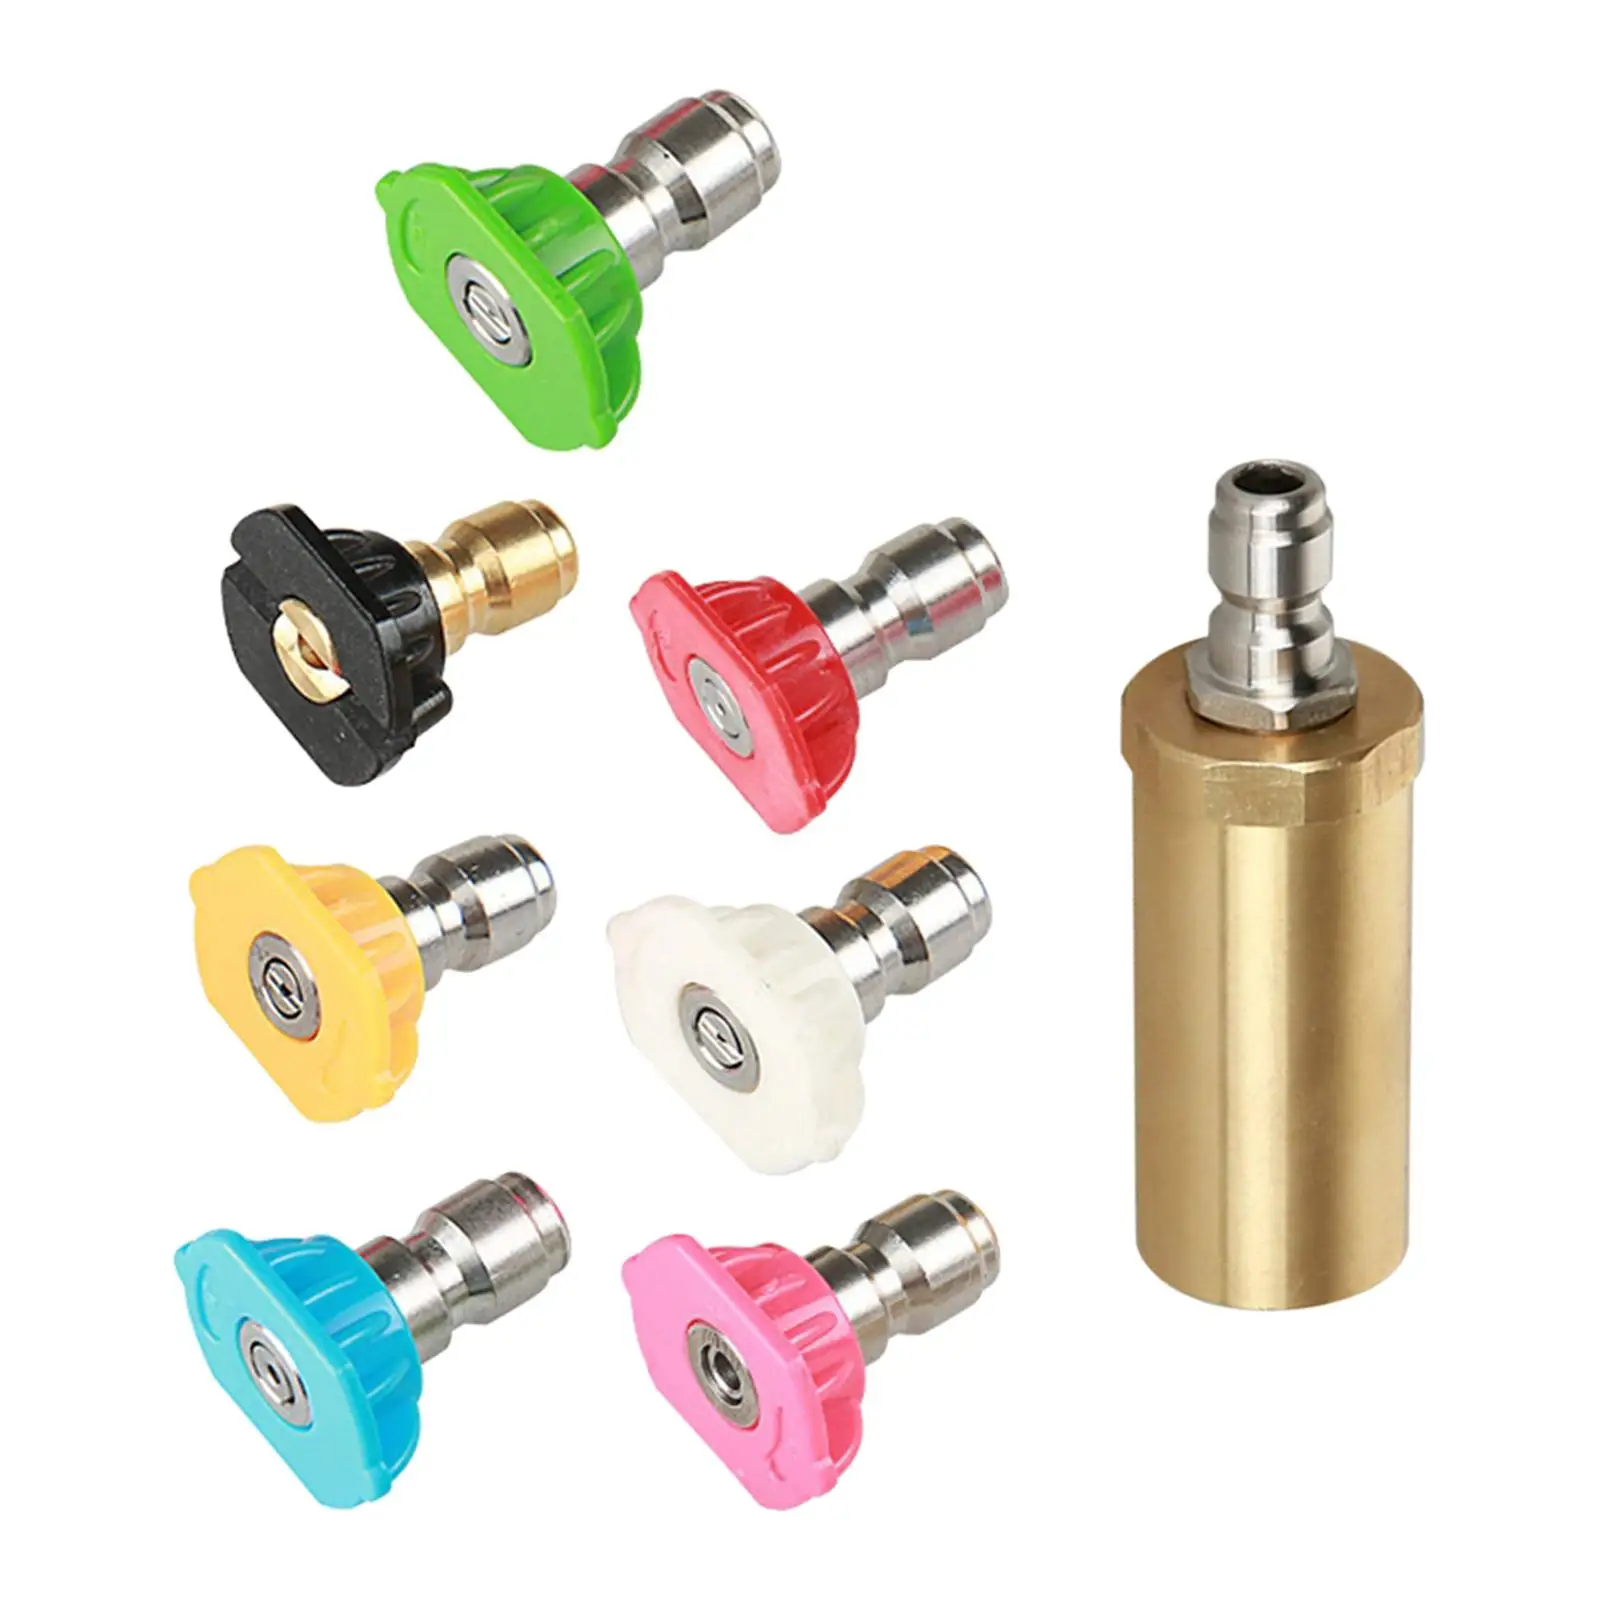 Brass High Pressure Washer Turbo Nozzle with 7 Spray Nozzle Tips Kit 0/15/25/40/65 Degrees,Soap,Rinse for Watering Plants